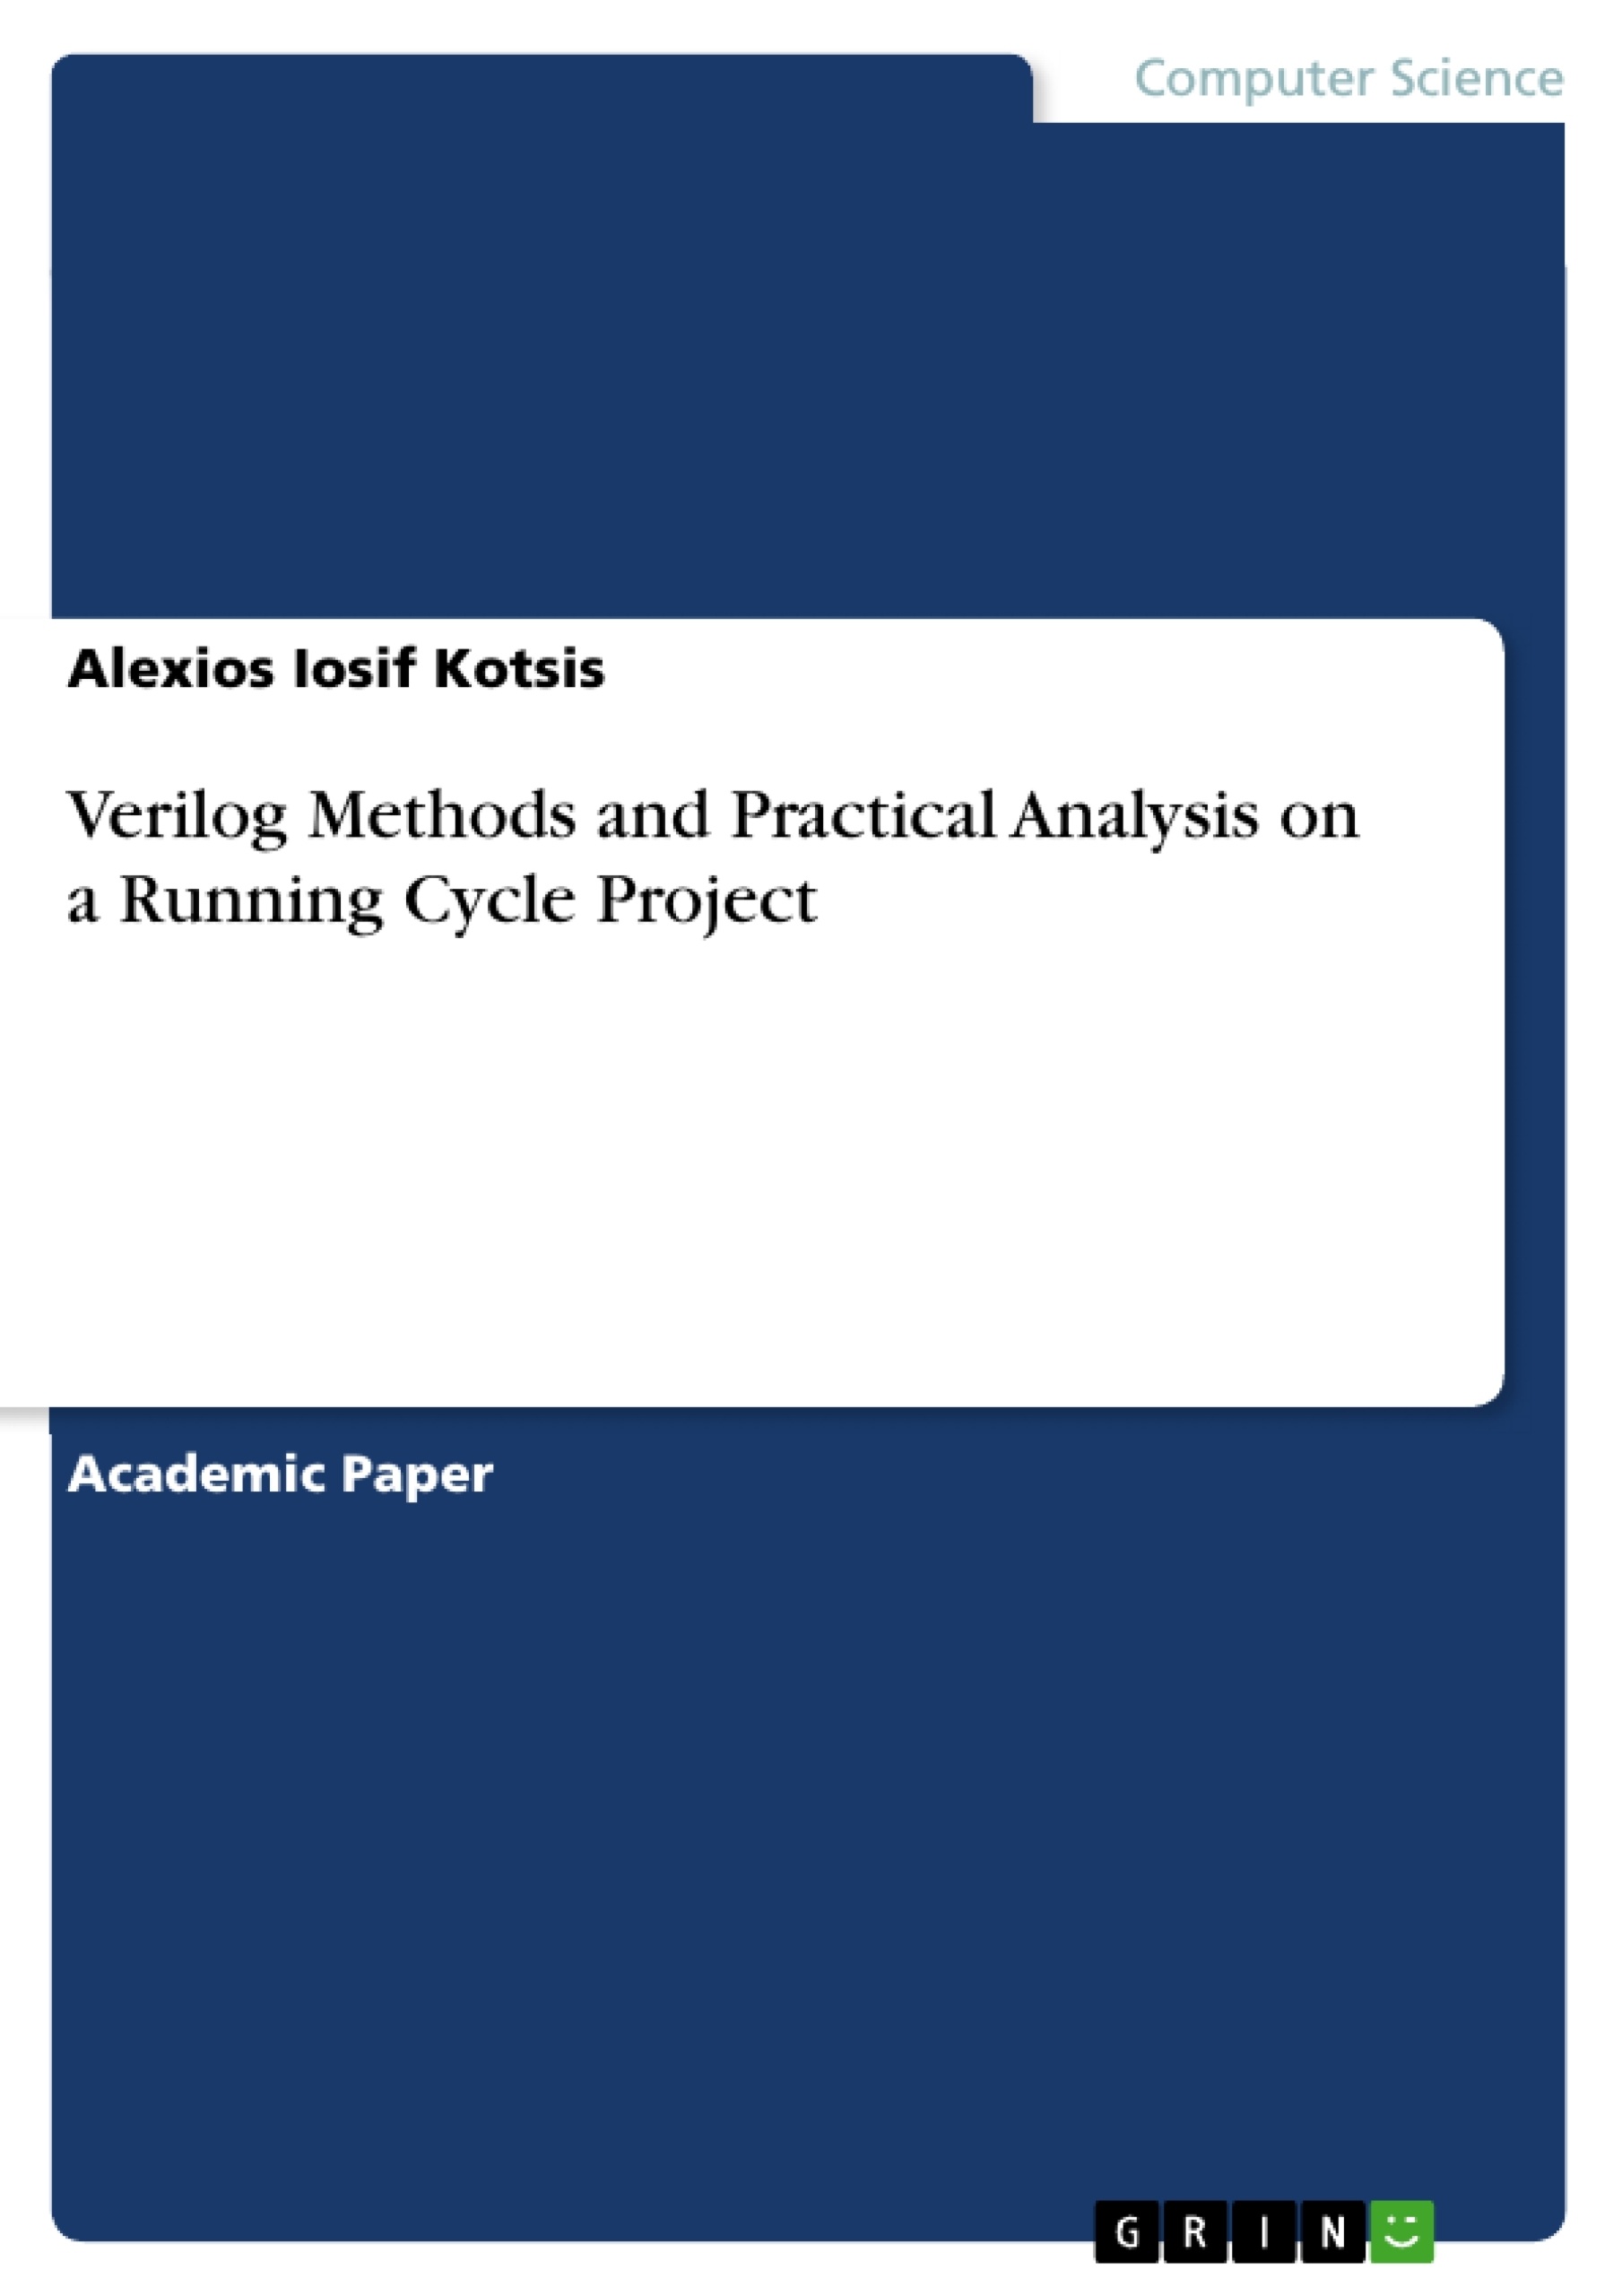 Title: Verilog Methods and Practical Analysis on a Running Cycle Project